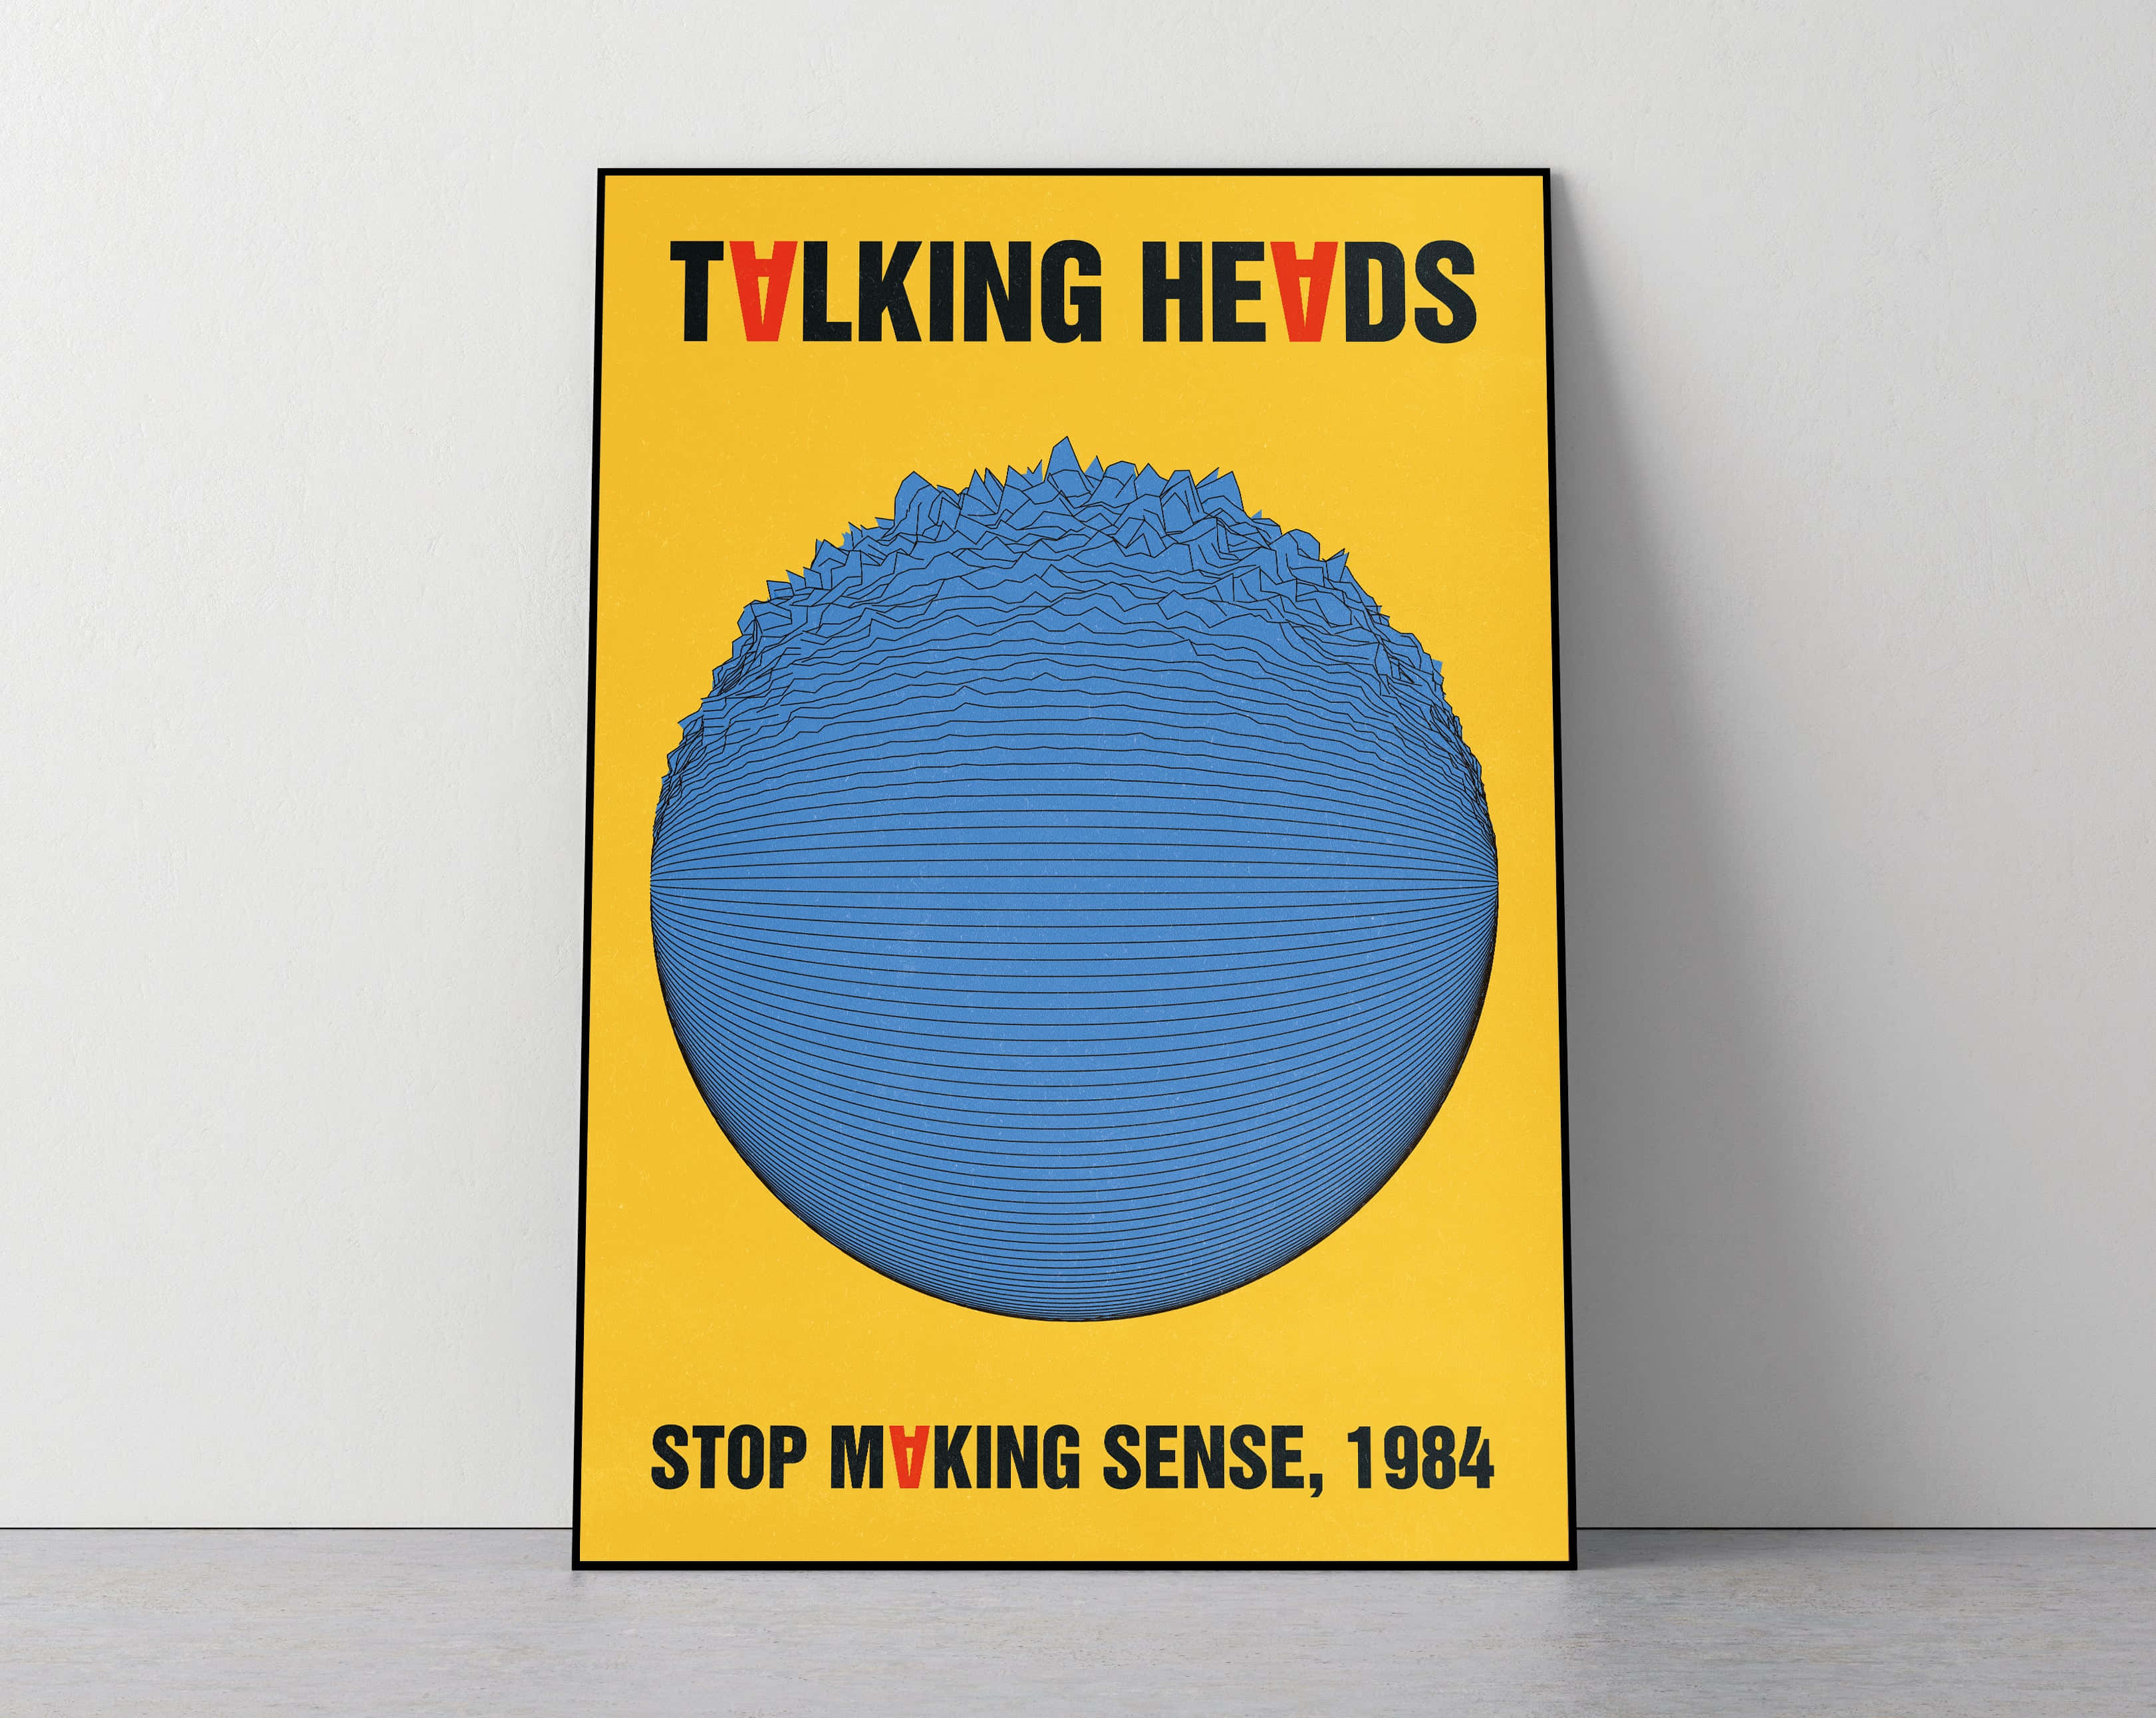 Band "talking Heads" Performing On Stage Wallpaper